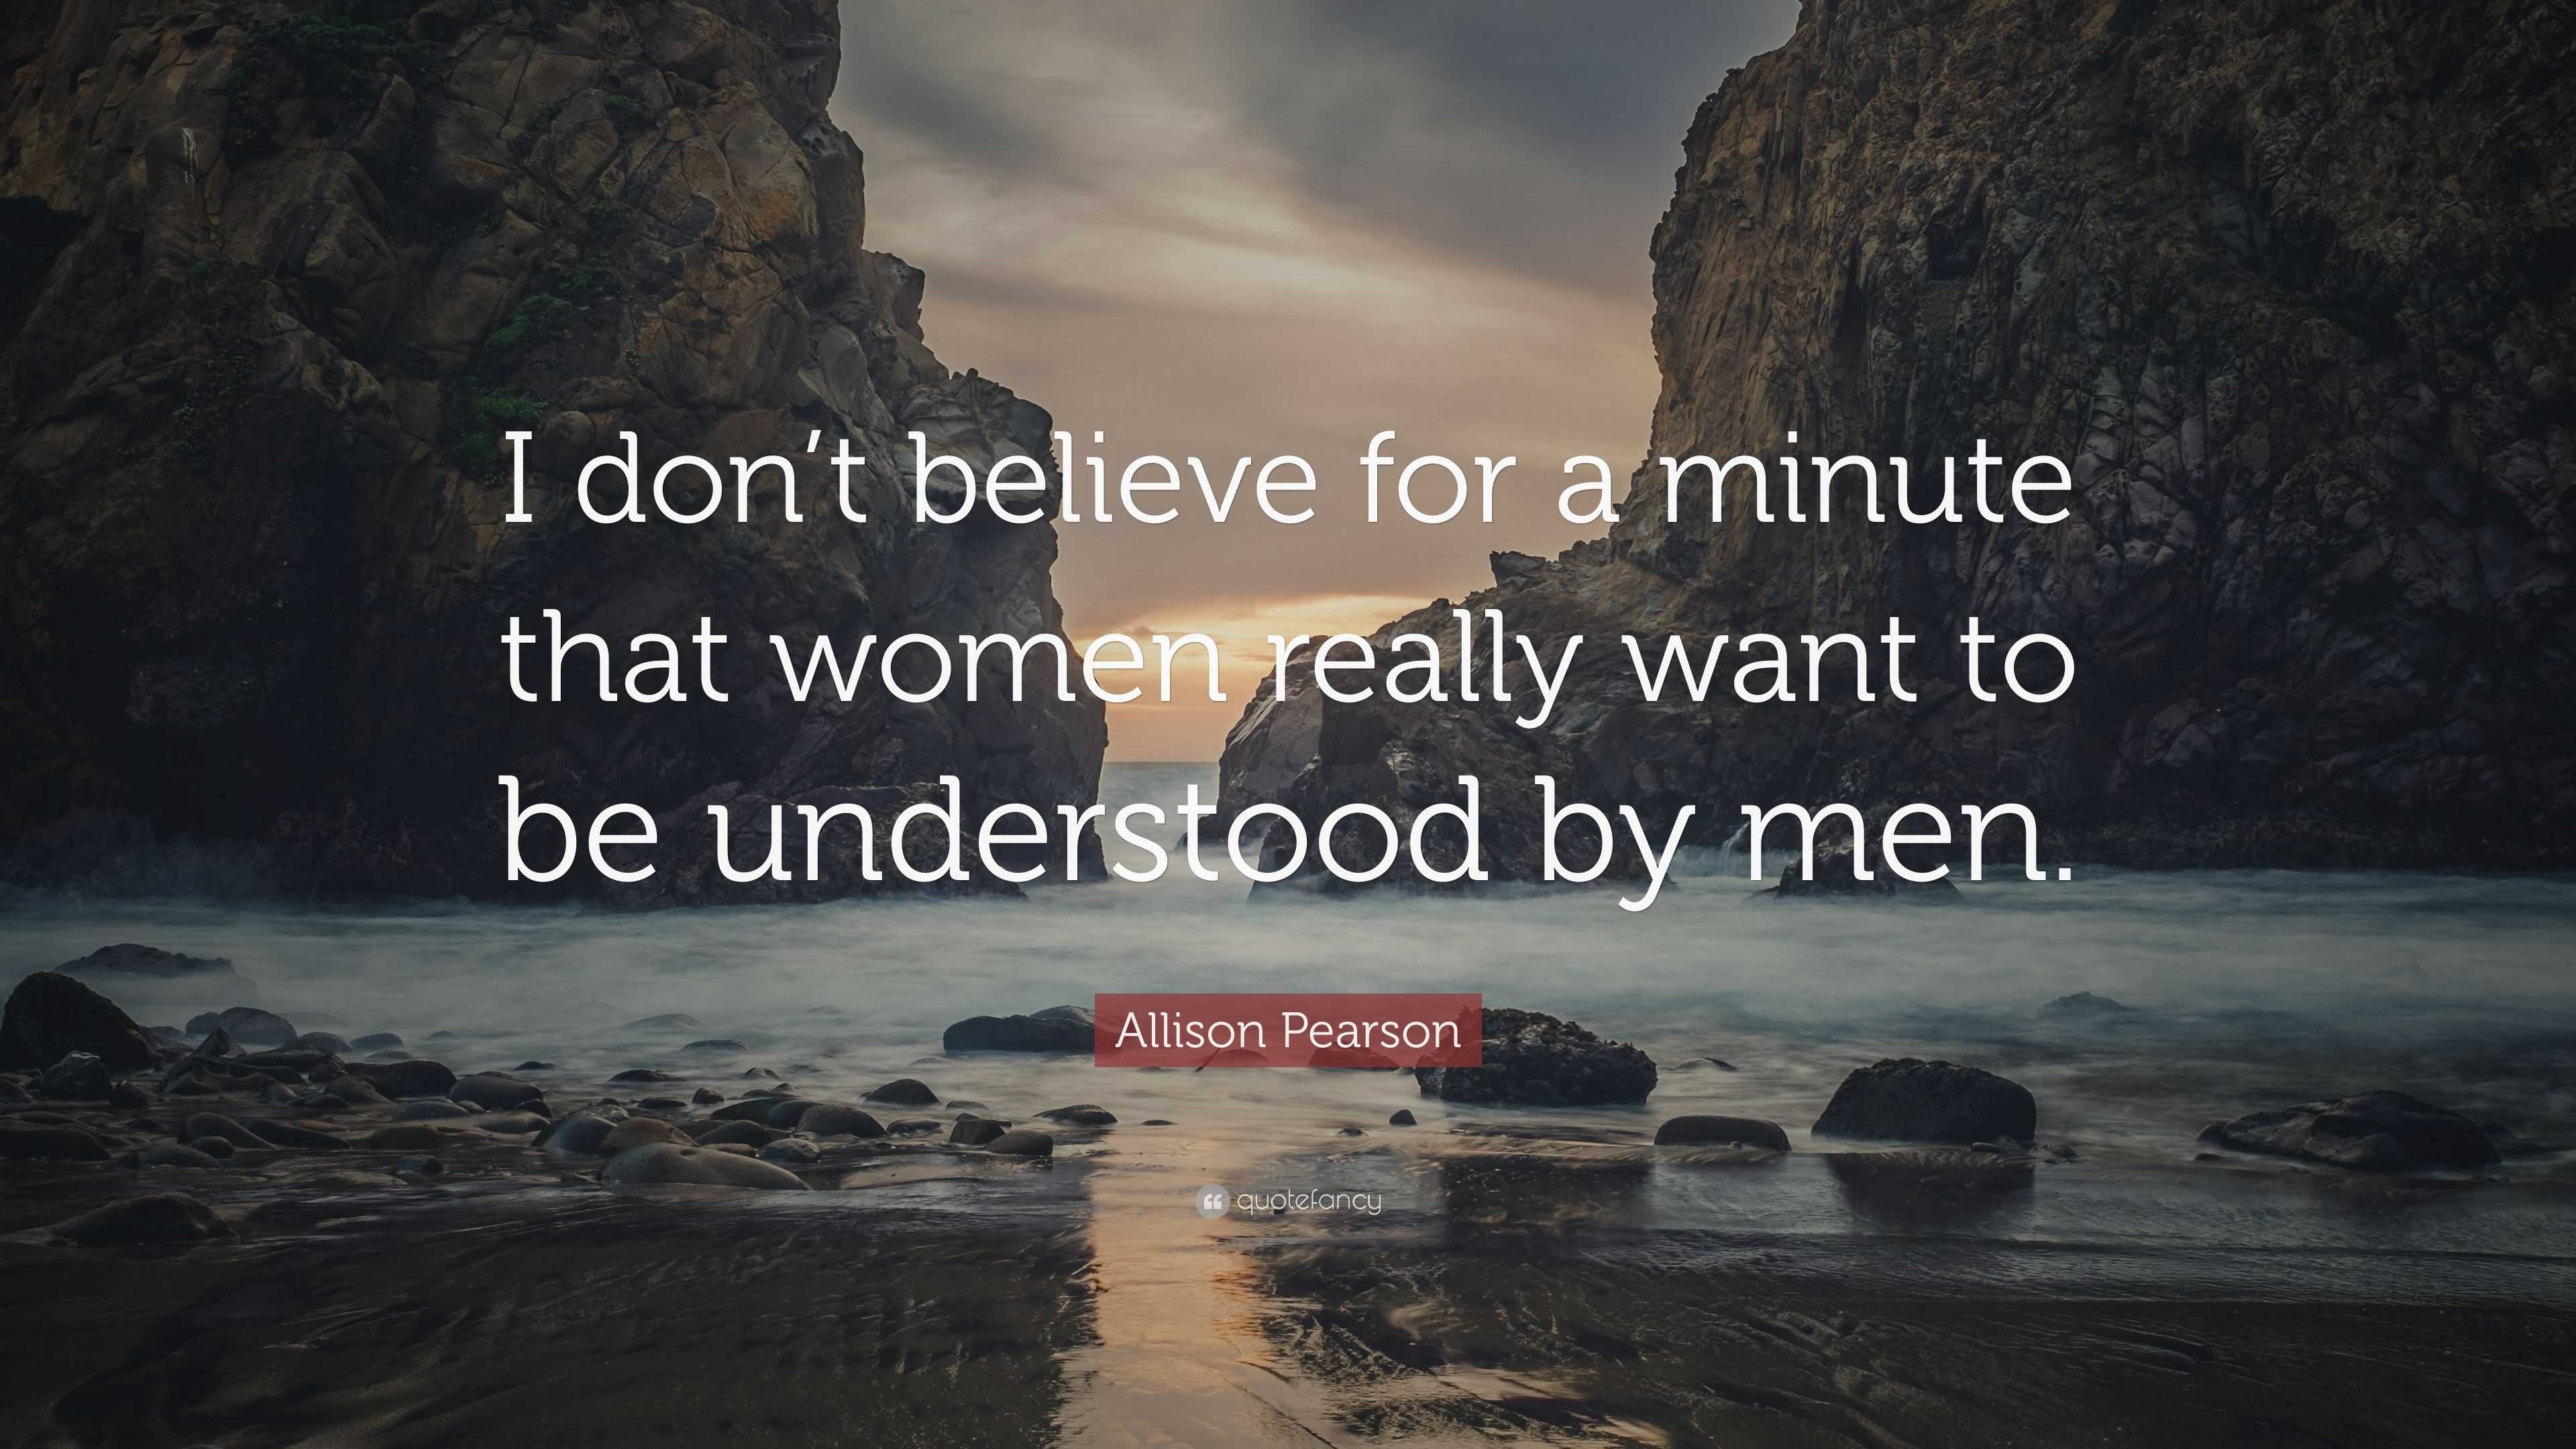 Allison Pearson Quote: “I don’t believe for a minute that women really ...